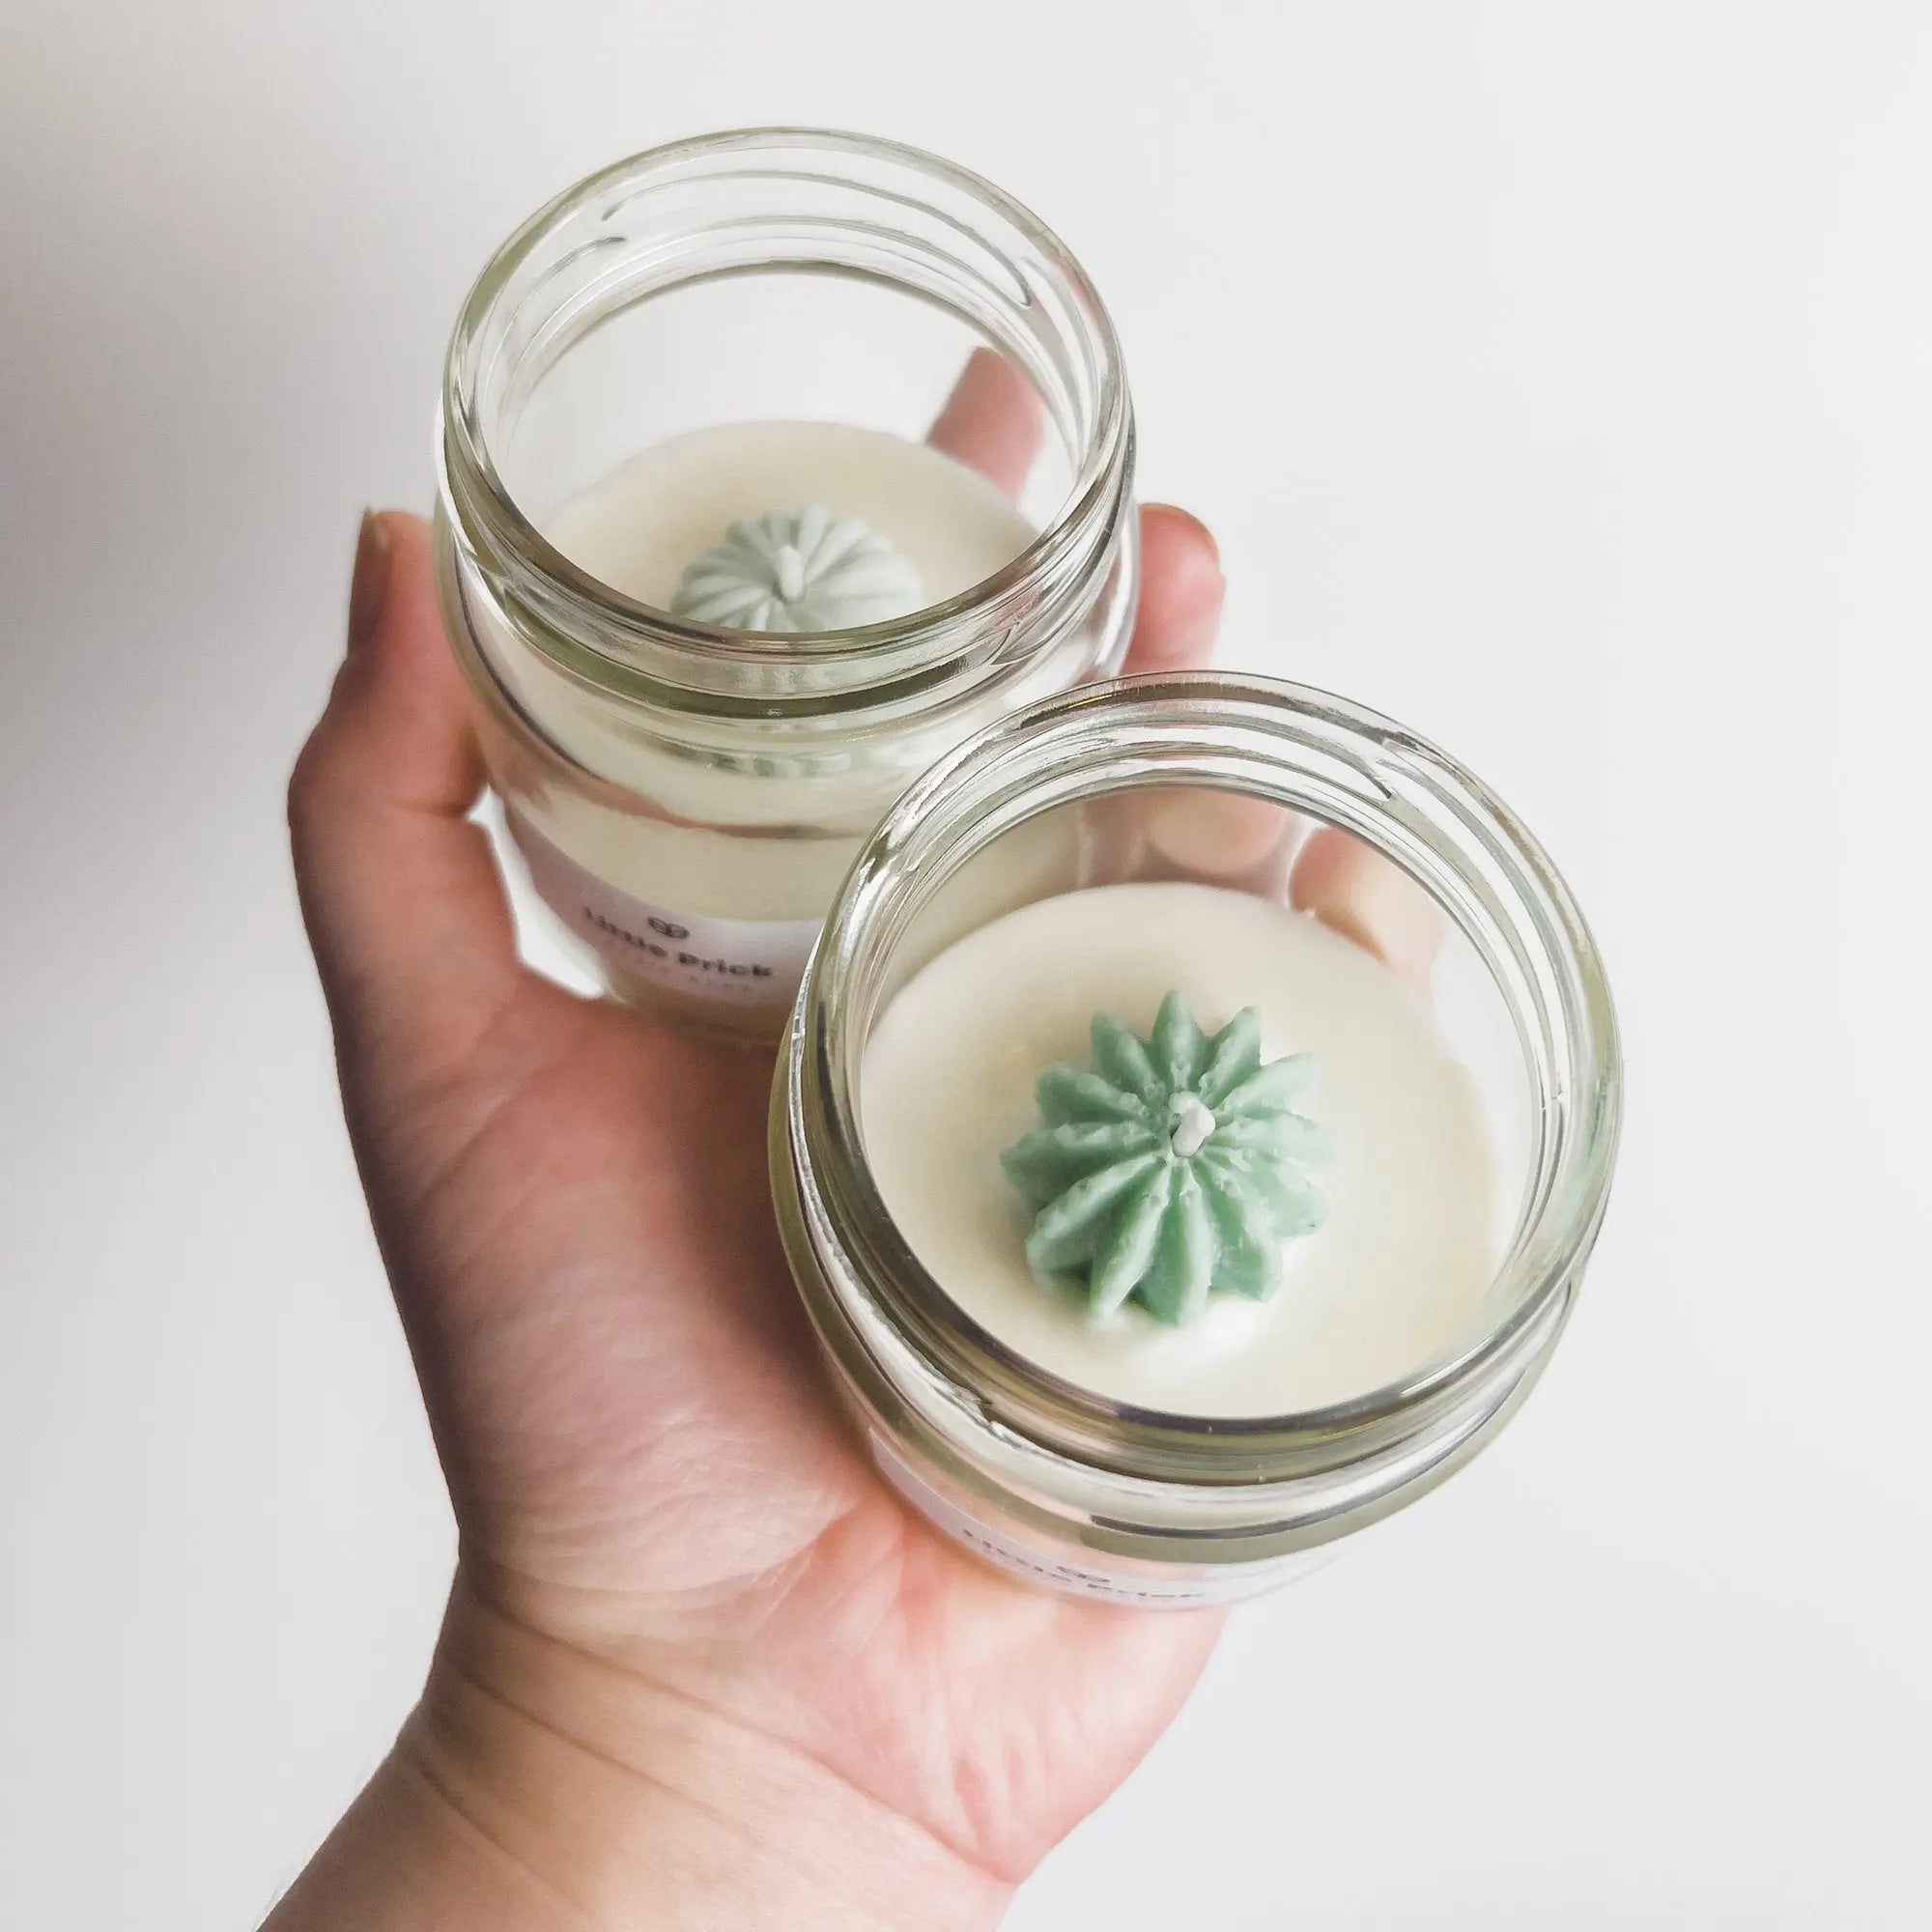 Mini Cactus Candle "Little Prick", Unscented - Handmade - Soy Wax - SMUKHI